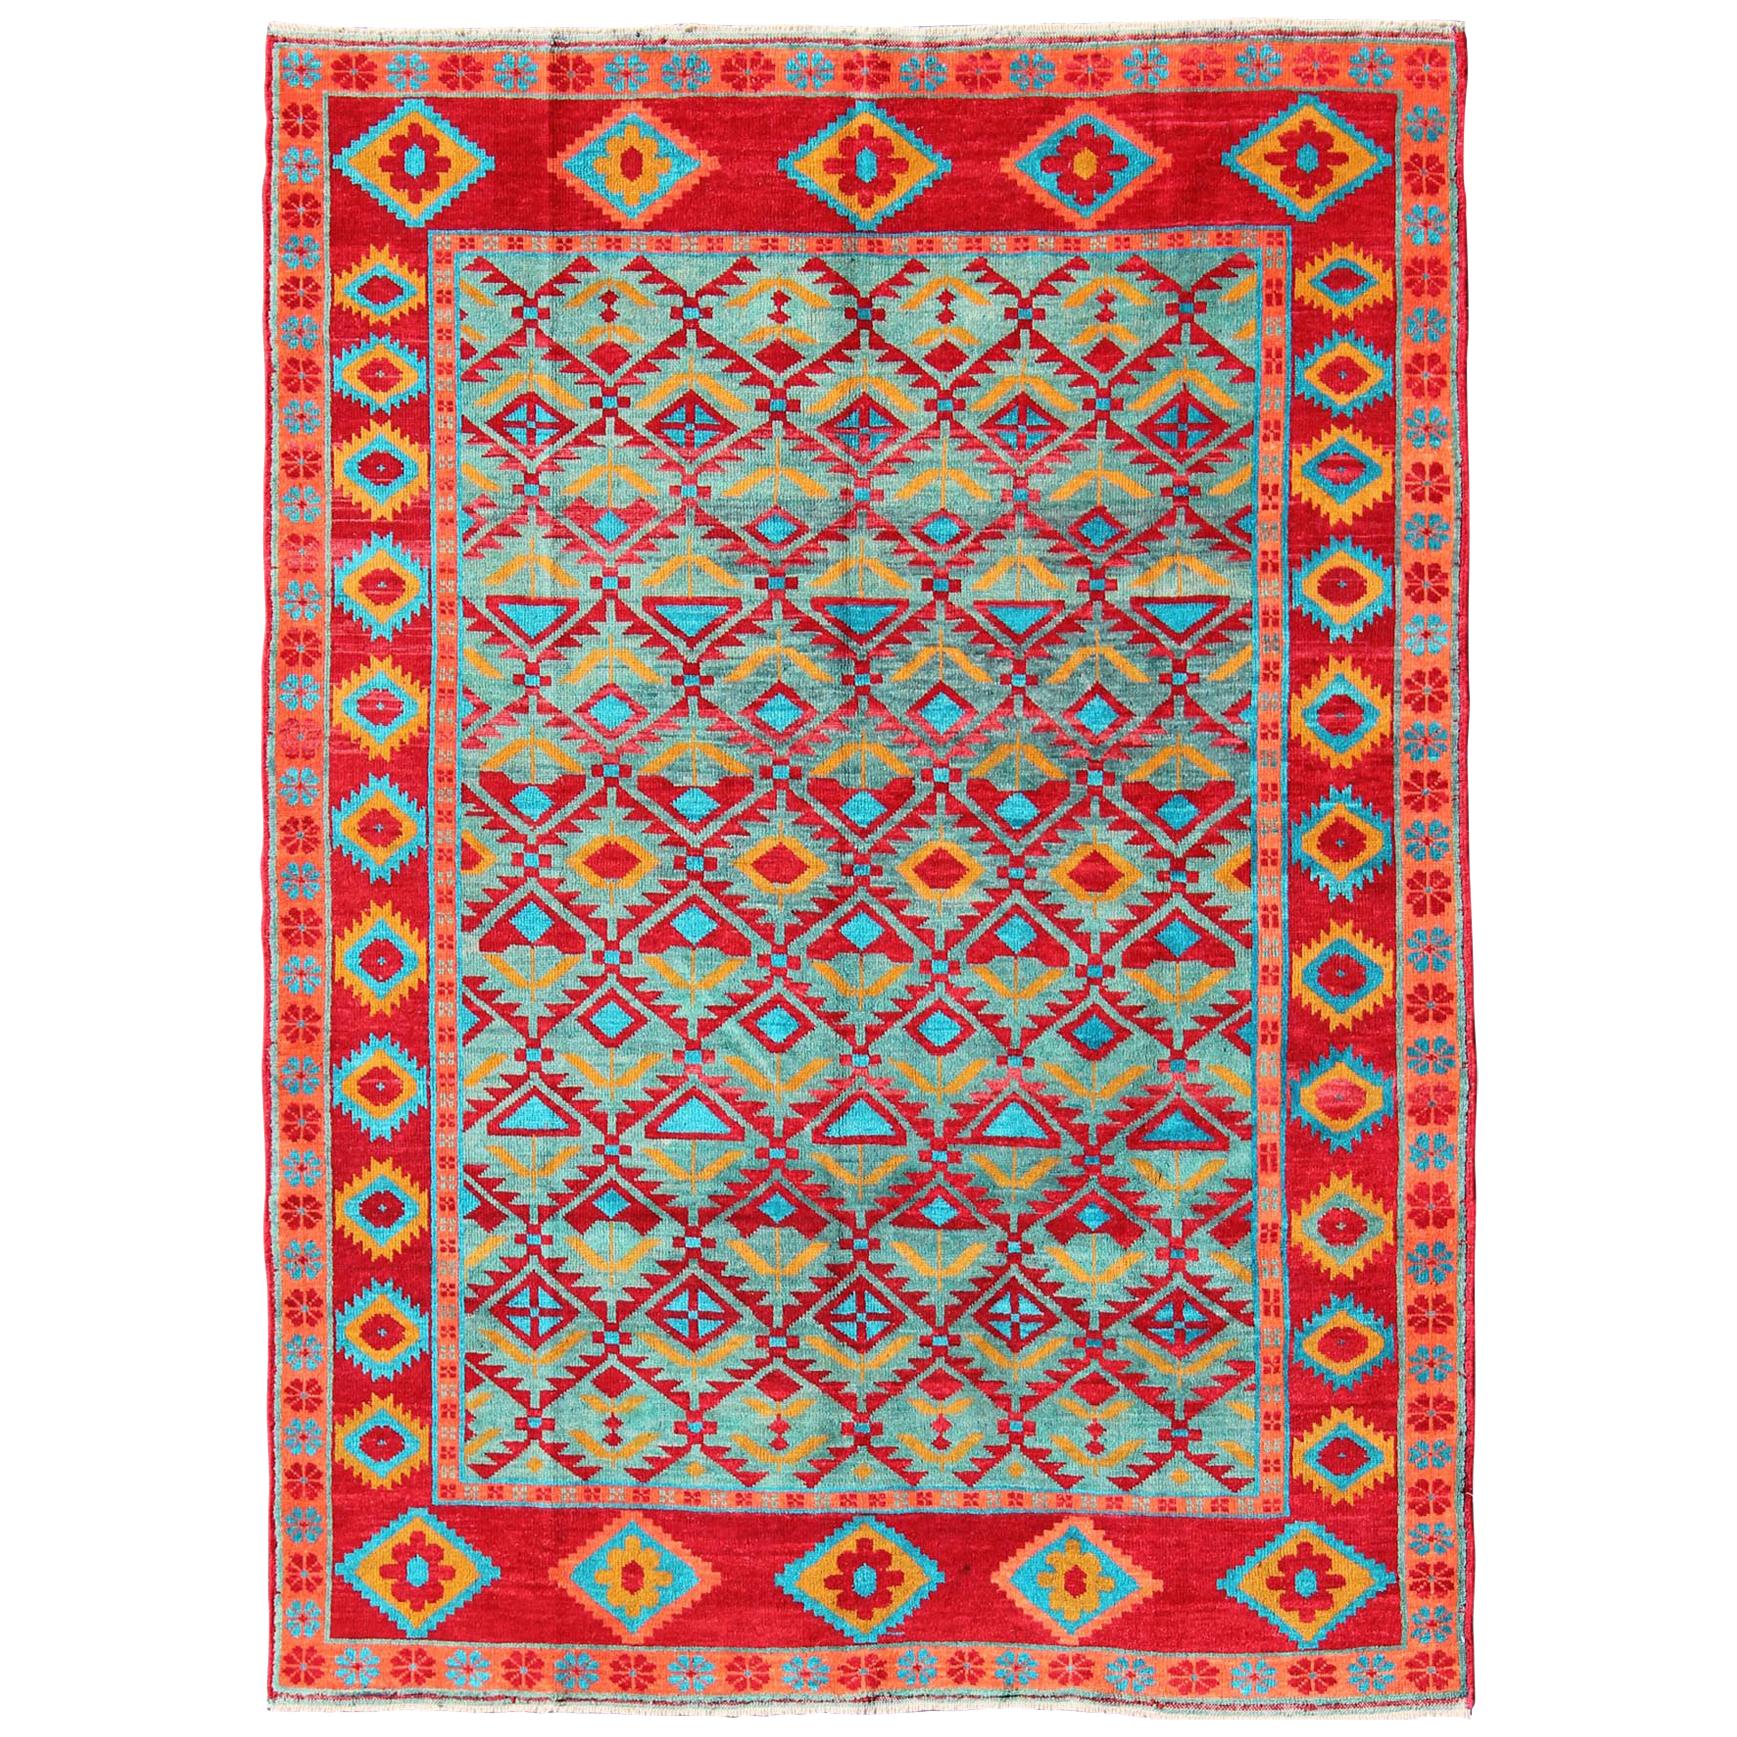 Unique and Vibrant Turkish Oushak Rug with Colorful and Bright Diamond Design